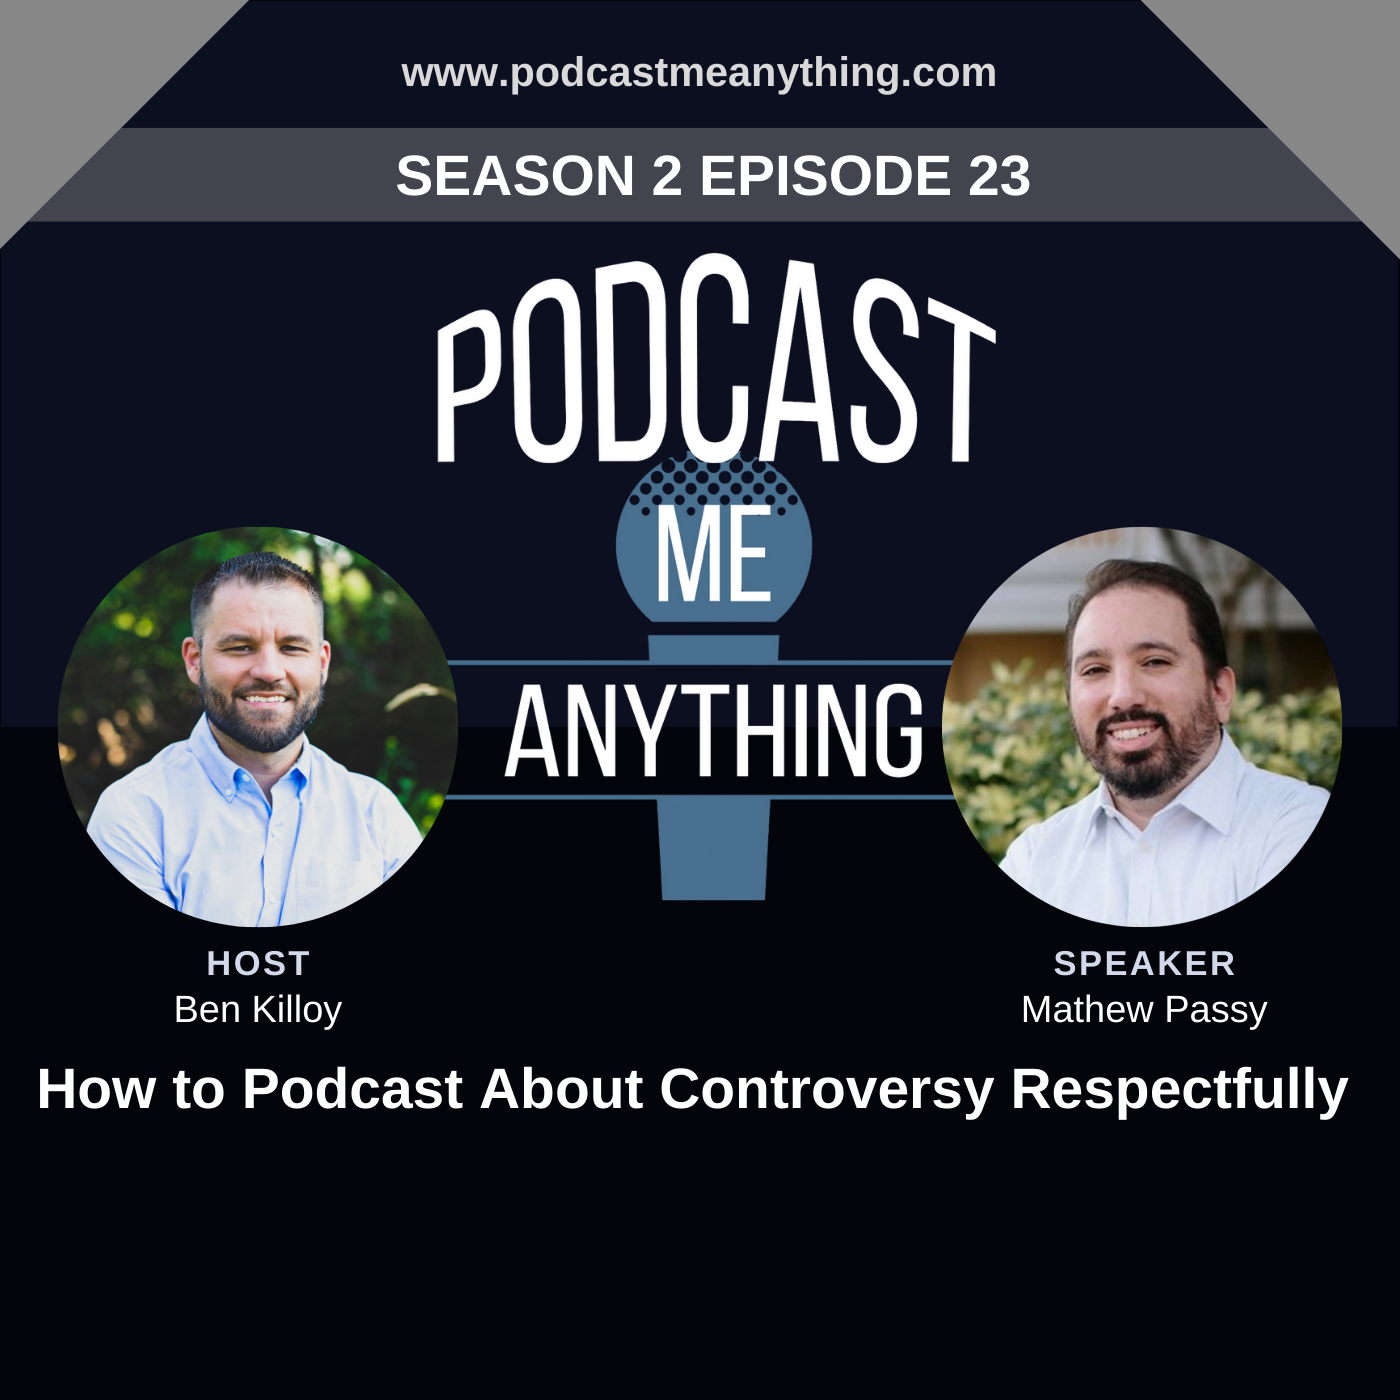 How to Podcast About Controversy Respectfully